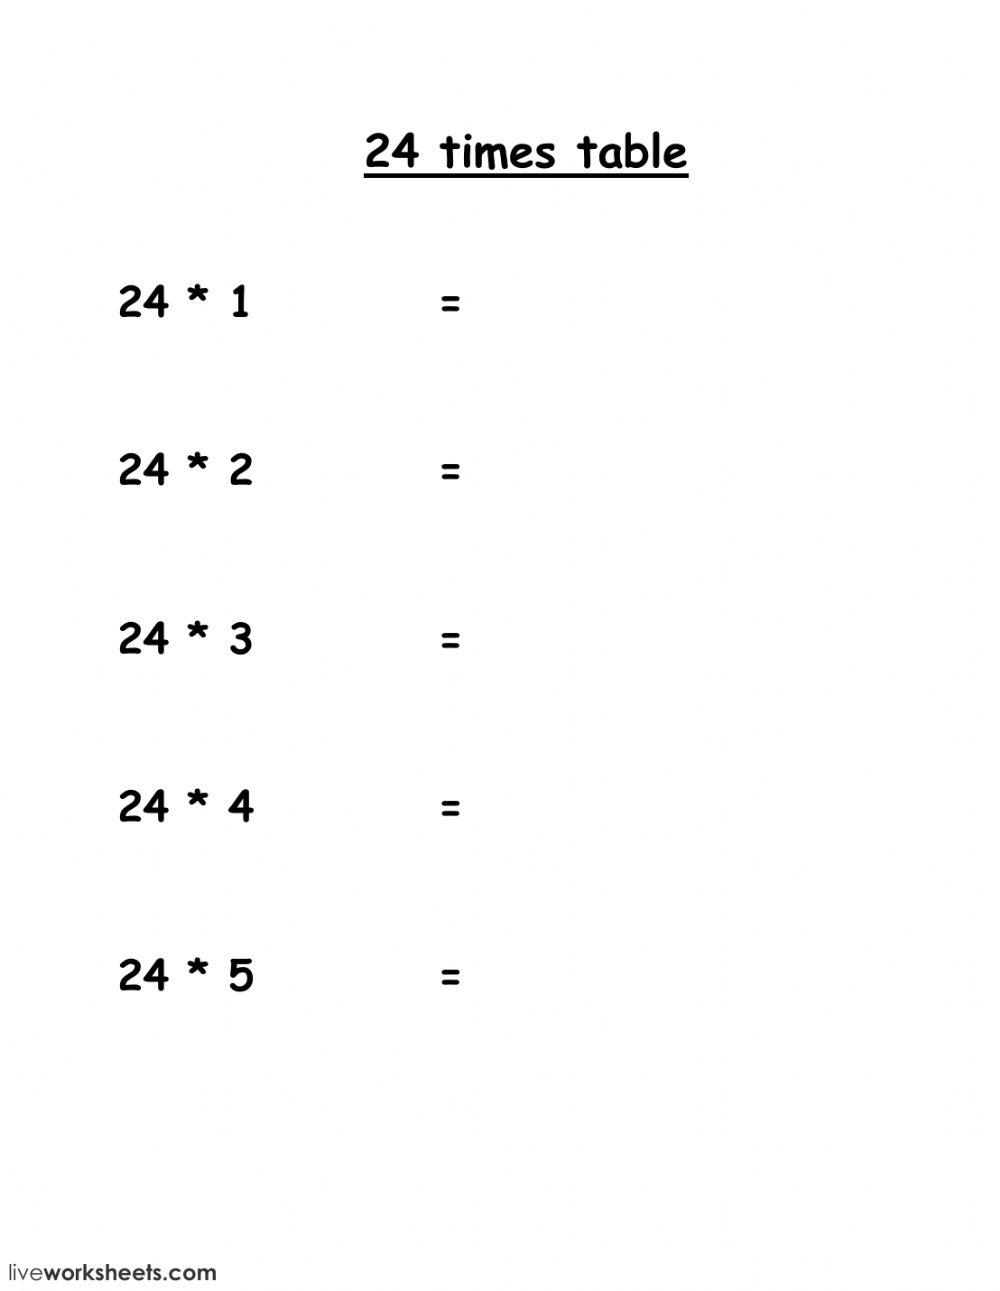 24 times table